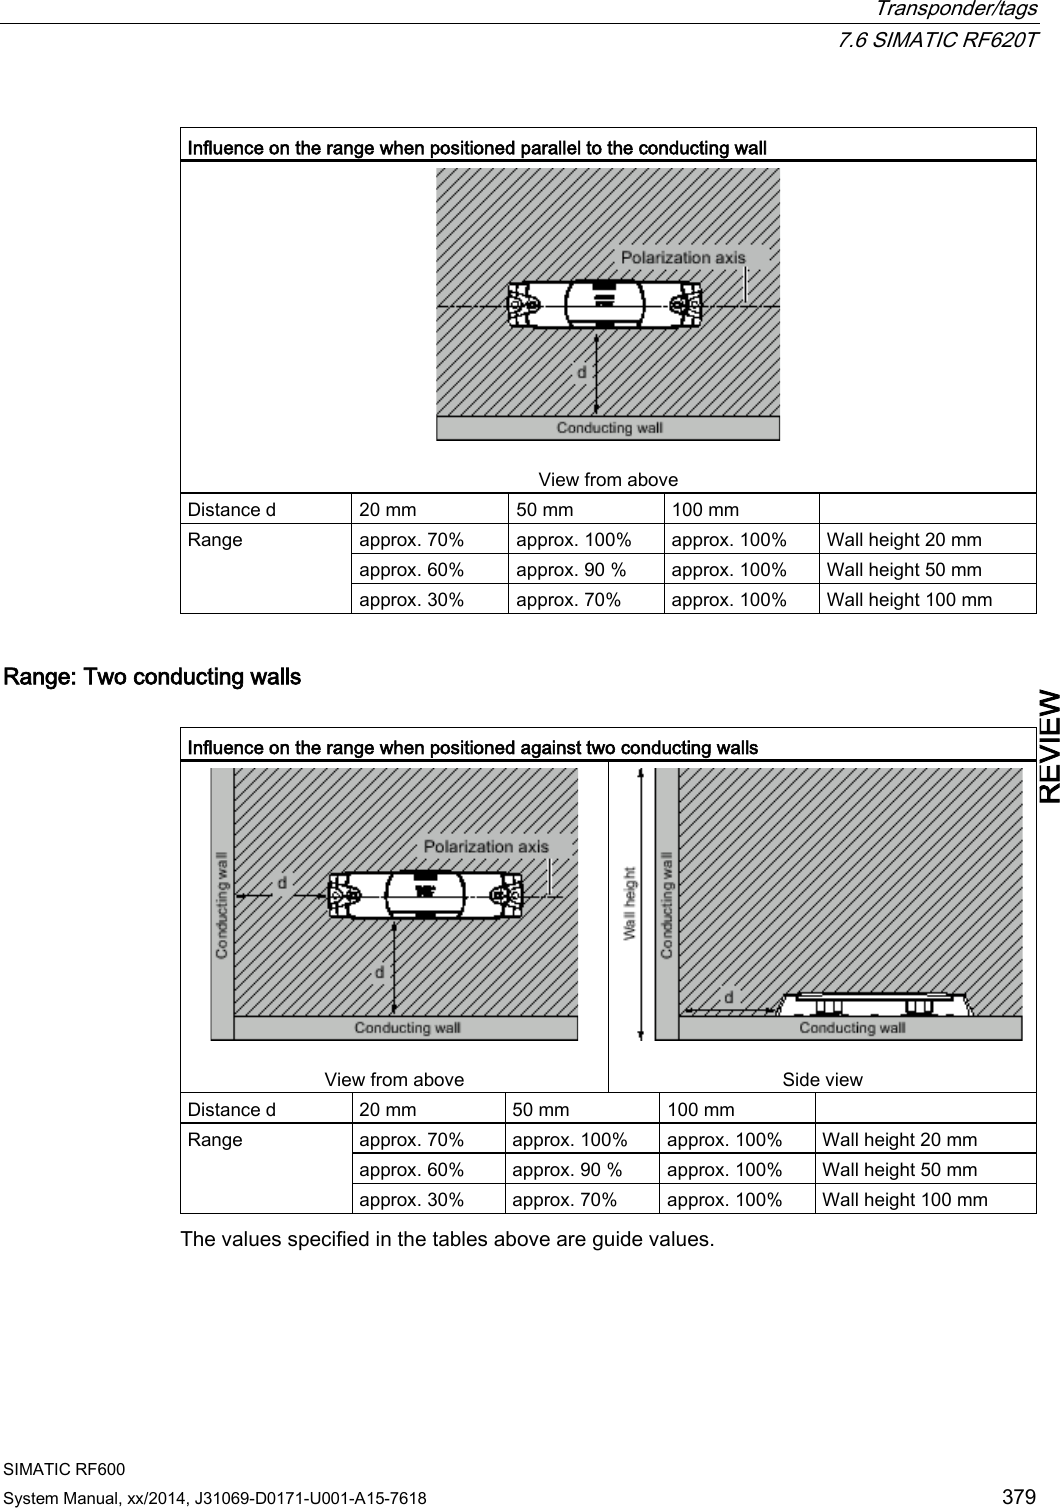  Transponder/tags  7.6 SIMATIC RF620T SIMATIC RF600 System Manual, xx/2014, J31069-D0171-U001-A15-7618 379 REVIEW  Influence on the range when positioned parallel to the conducting wall   View from above  Distance d 20 mm 50 mm 100 mm  Range approx. 70% approx. 100% approx. 100% Wall height 20 mm approx. 60% approx. 90 % approx. 100% Wall height 50 mm approx. 30% approx. 70% approx. 100% Wall height 100 mm Range: Two conducting walls  Influence on the range when positioned against two conducting walls   View from above   Side view Distance d 20 mm 50 mm 100 mm  Range approx. 70% approx. 100% approx. 100% Wall height 20 mm approx. 60% approx. 90 % approx. 100% Wall height 50 mm approx. 30% approx. 70% approx. 100% Wall height 100 mm The values specified in the tables above are guide values.  